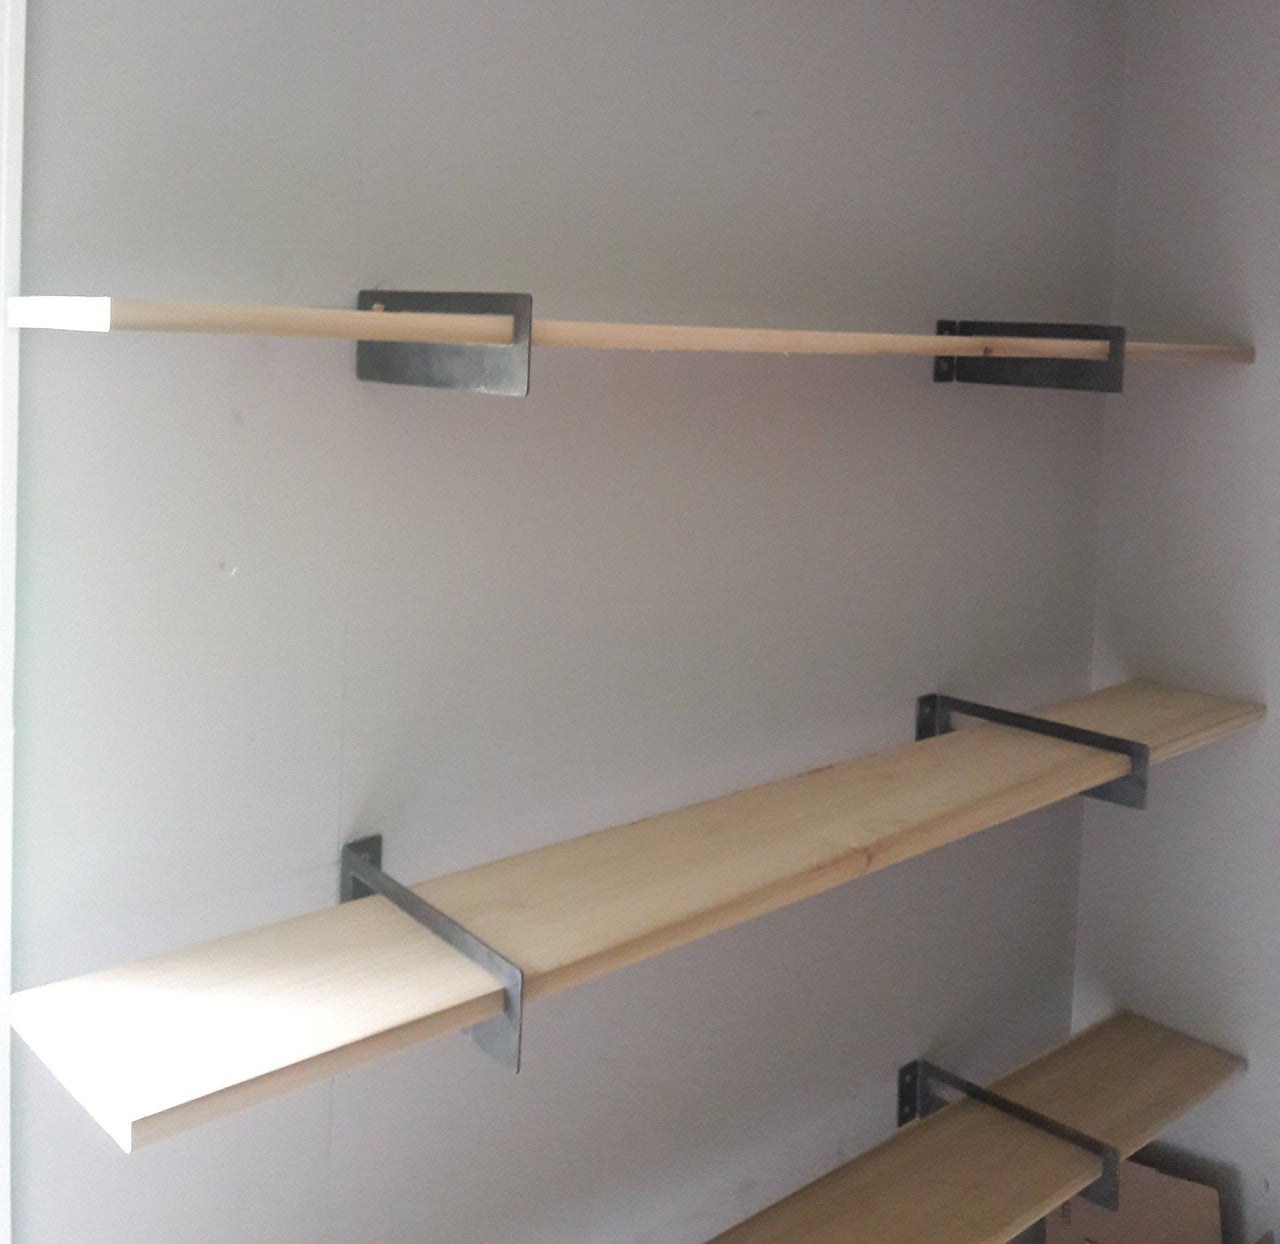 How to Install Wall Shelves Using Standards and Brackets